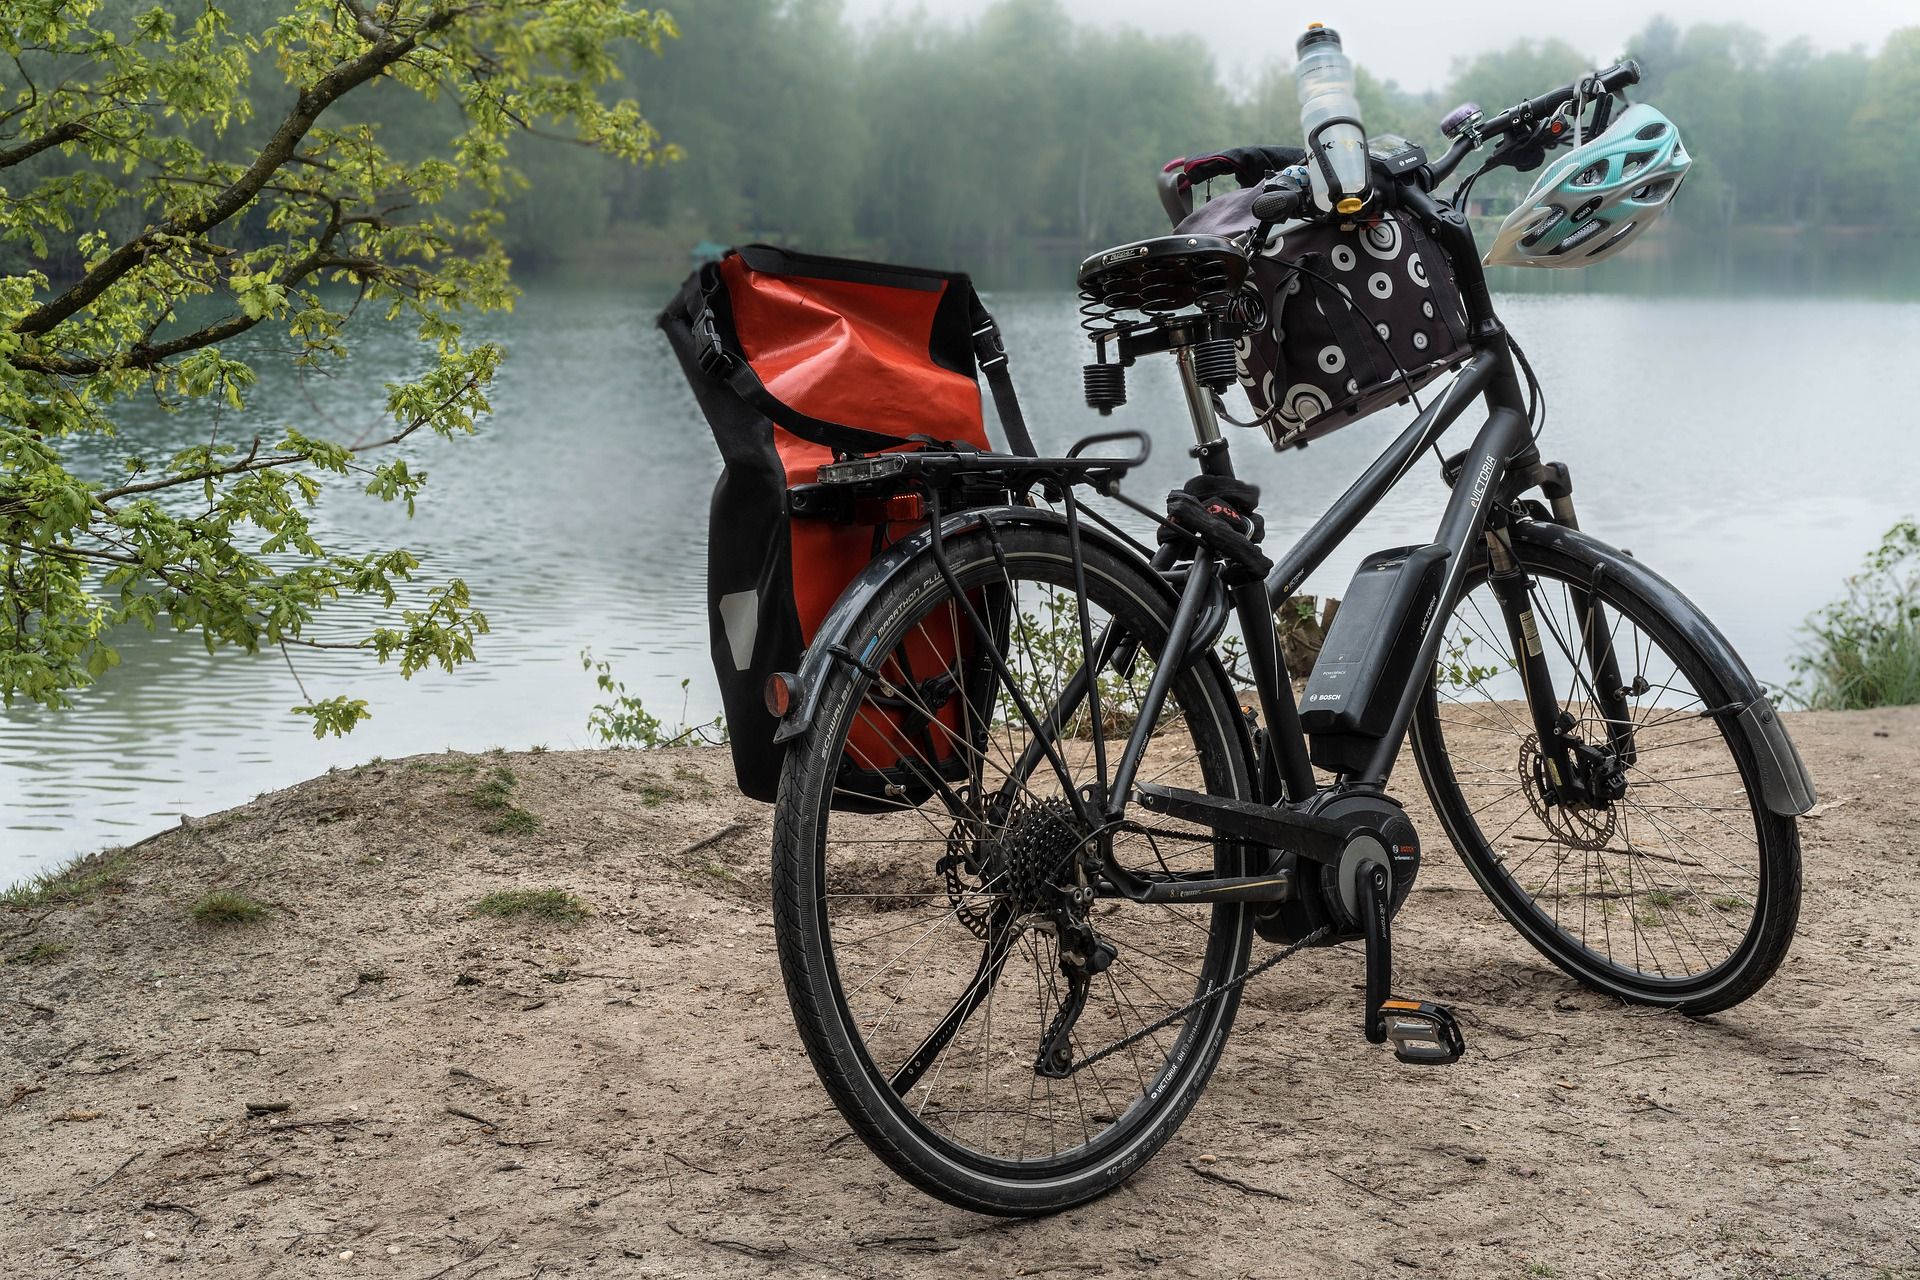 Planning your next e-bike tour? Check out these 3 first